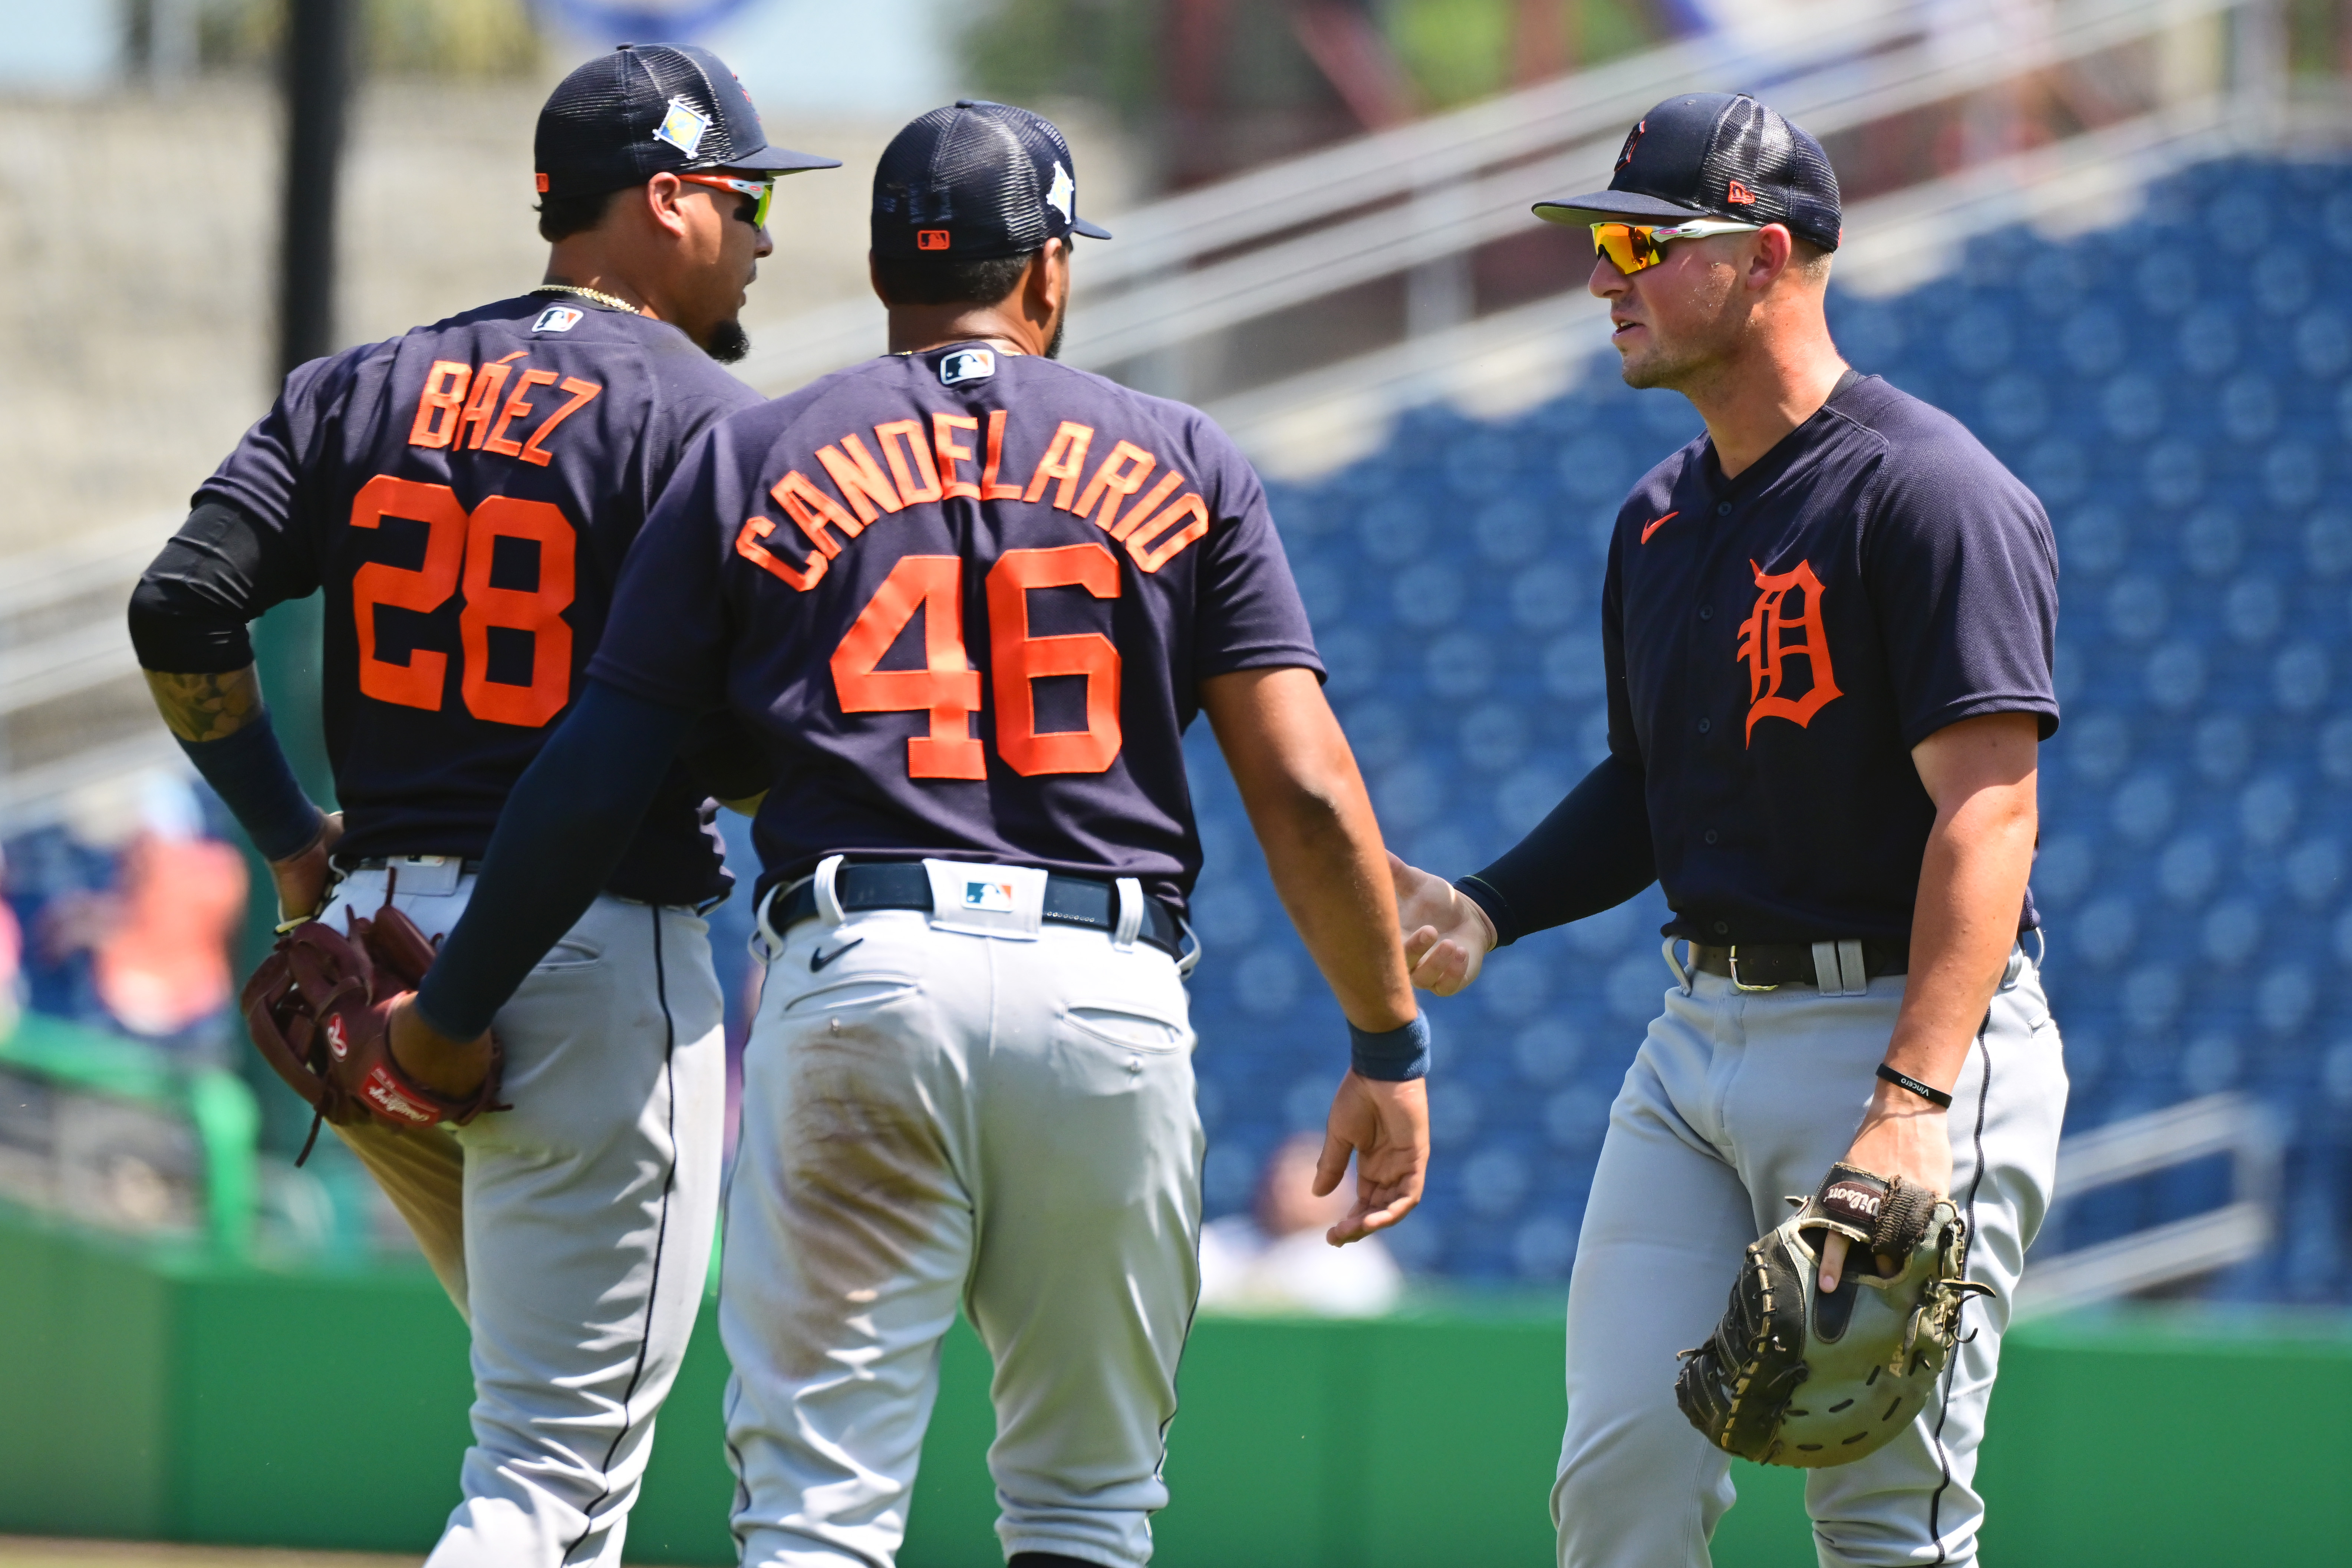 Spring training 2017: The Tigers got no-hit but it doesn't matter